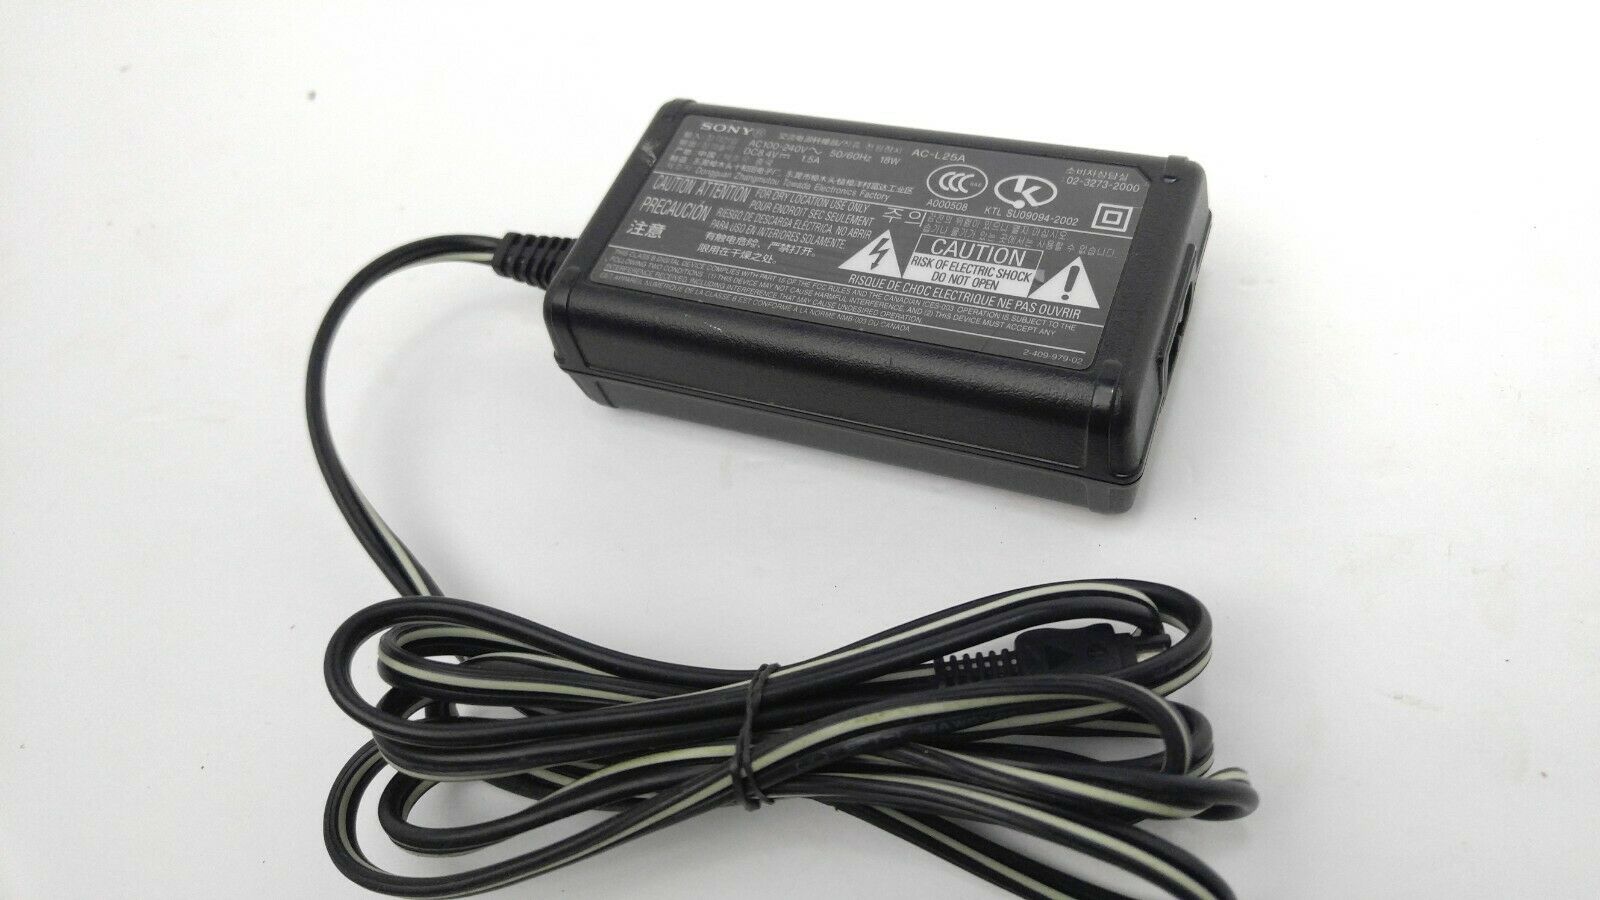 AC-L25A Sony AC Adapter for Handycam HDR-CX560